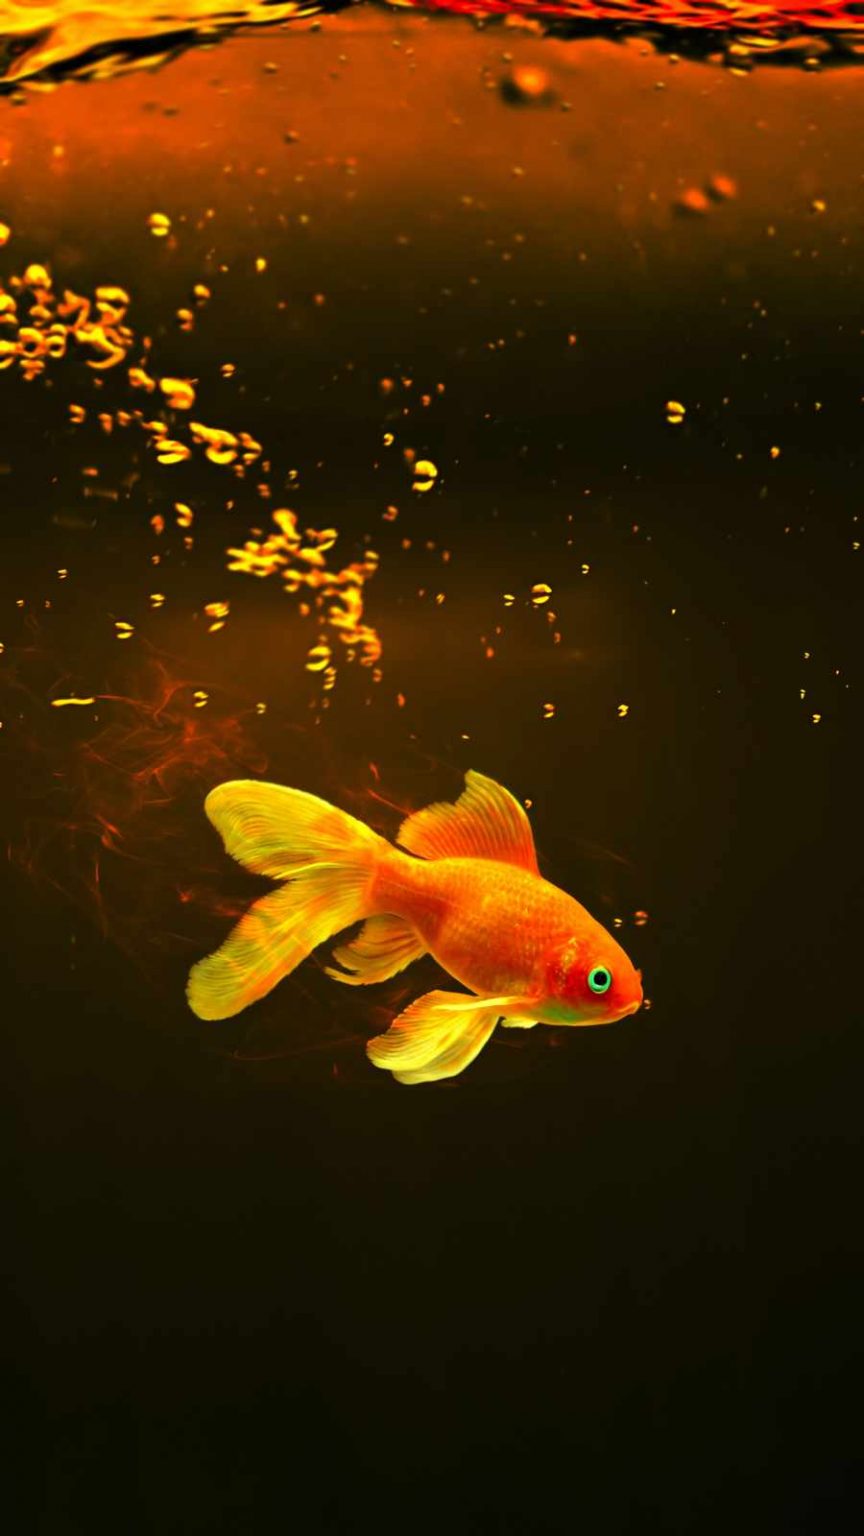 Gold Fish iPhone Wallpaper - iPhone Wallpapers